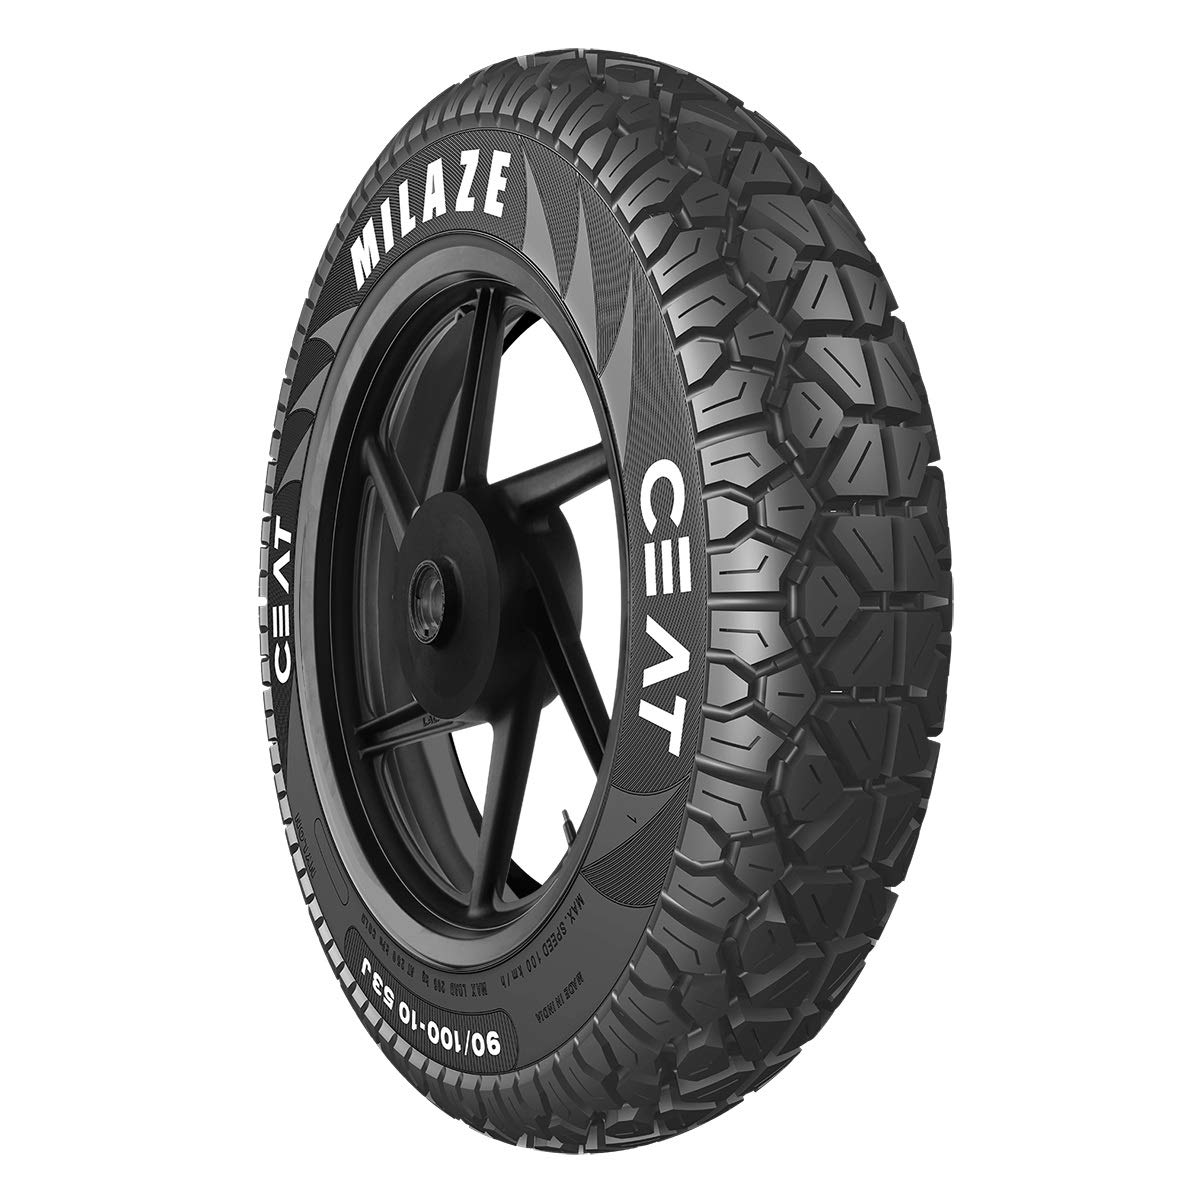 90/100 -10 53J Ceat Milaze Tubeless Scooter Tyre, Front or Rear (Home Delivery FREE)